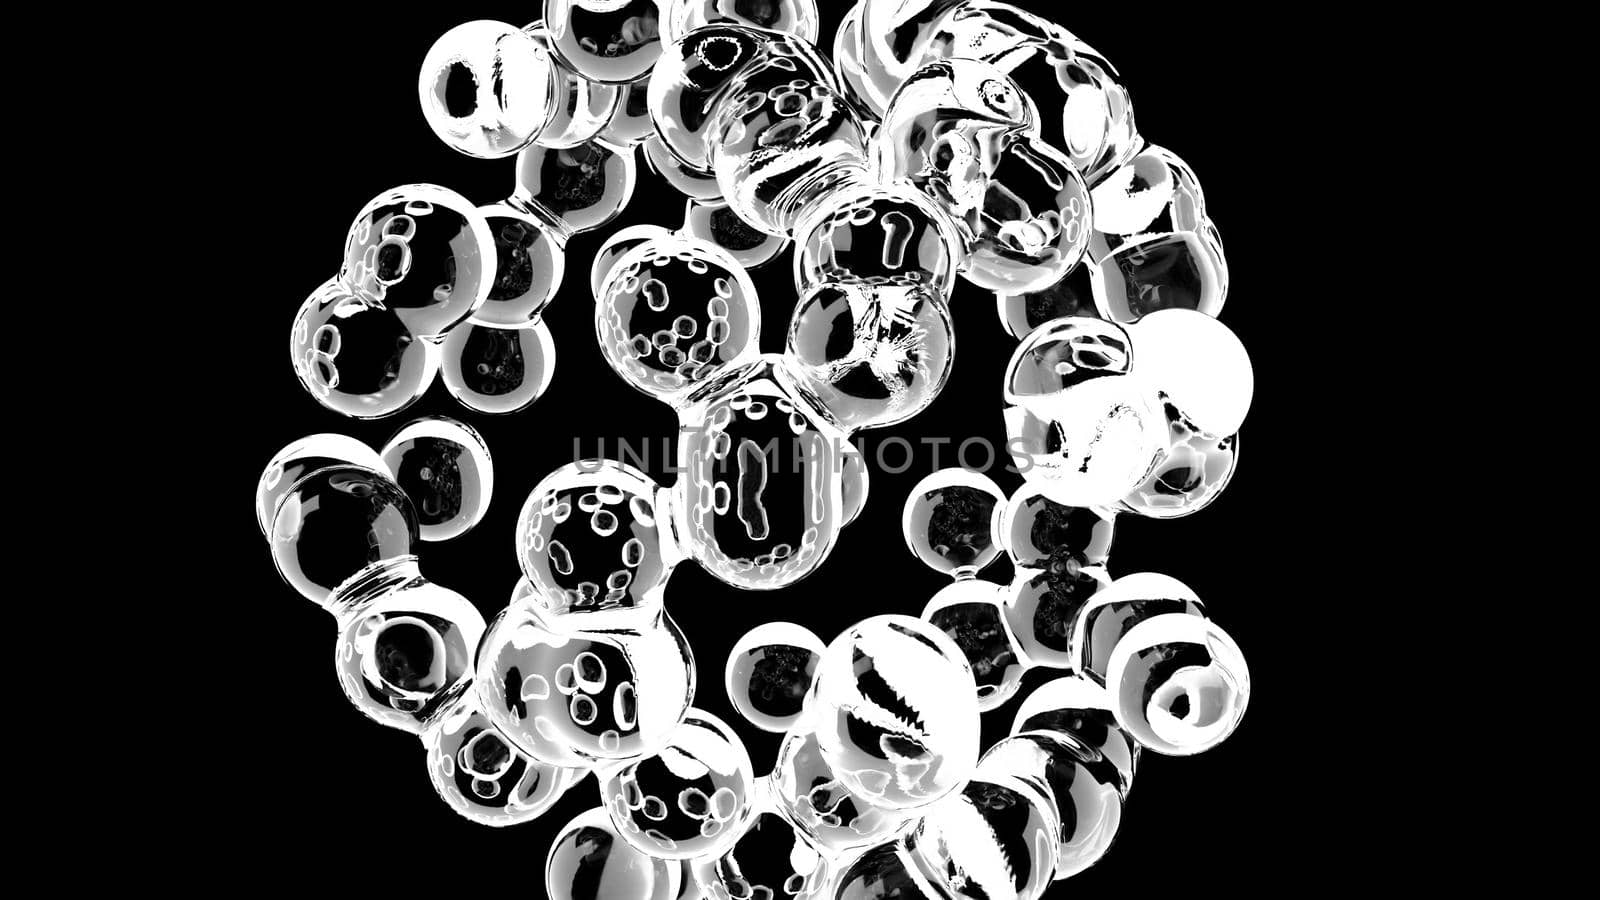 Metaballs Liquid bubbles on black background particles of Fresh water 3d render by Zozulinskyi